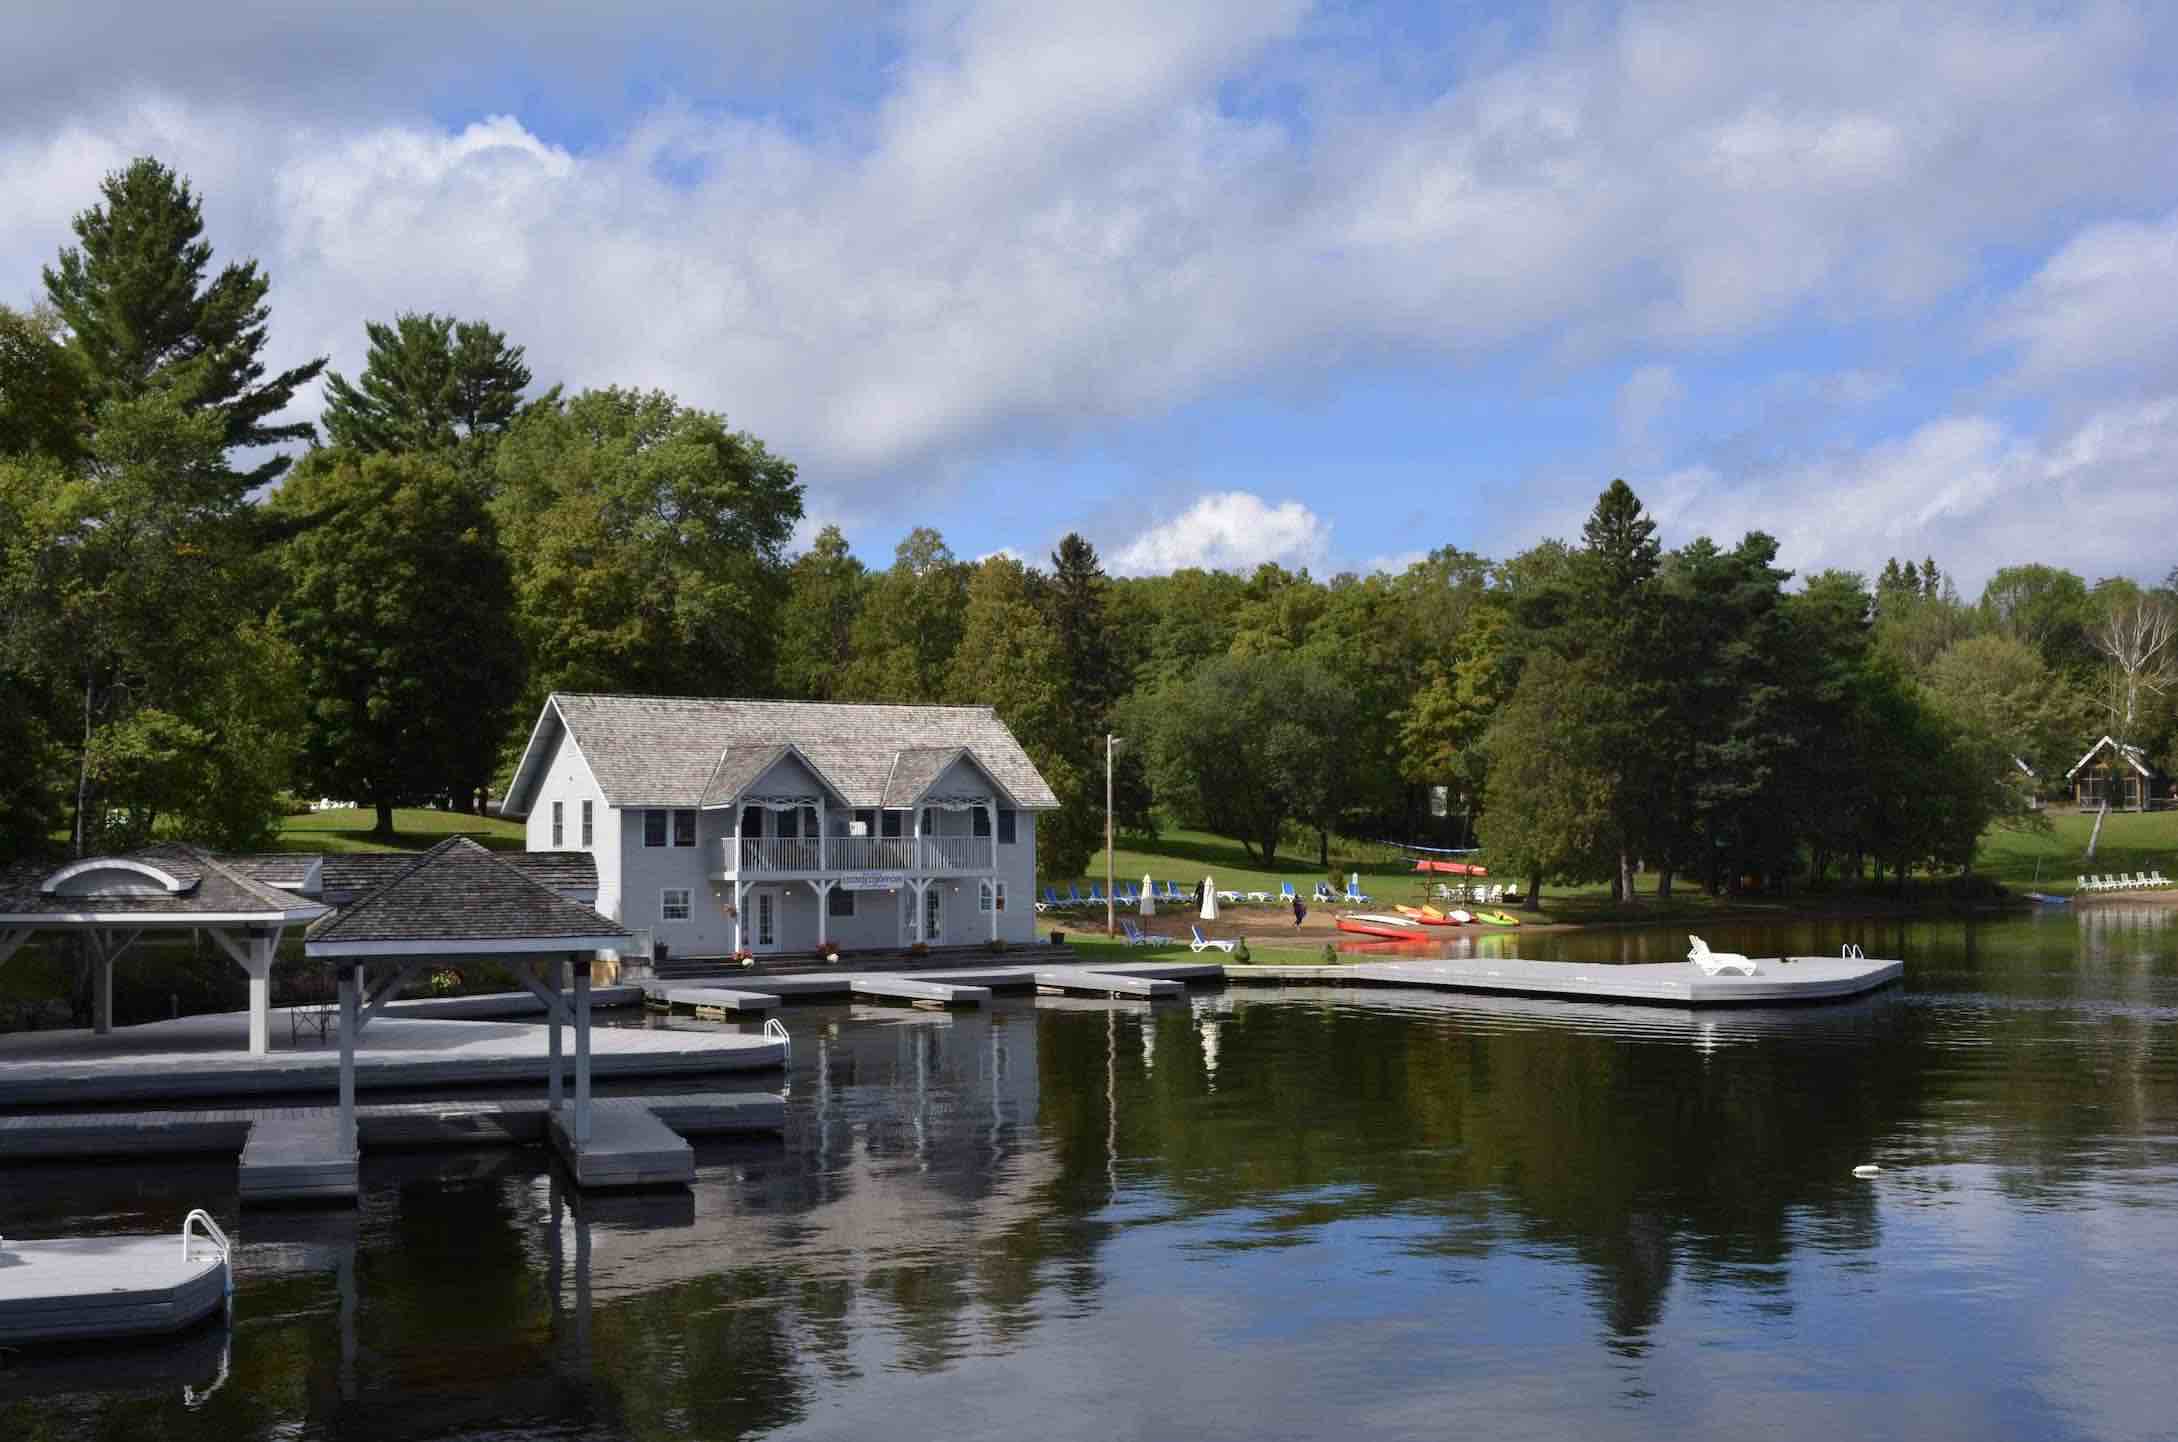 Port Cunnington Lodge with boathouse is one of the top luxury Muskoka resorts